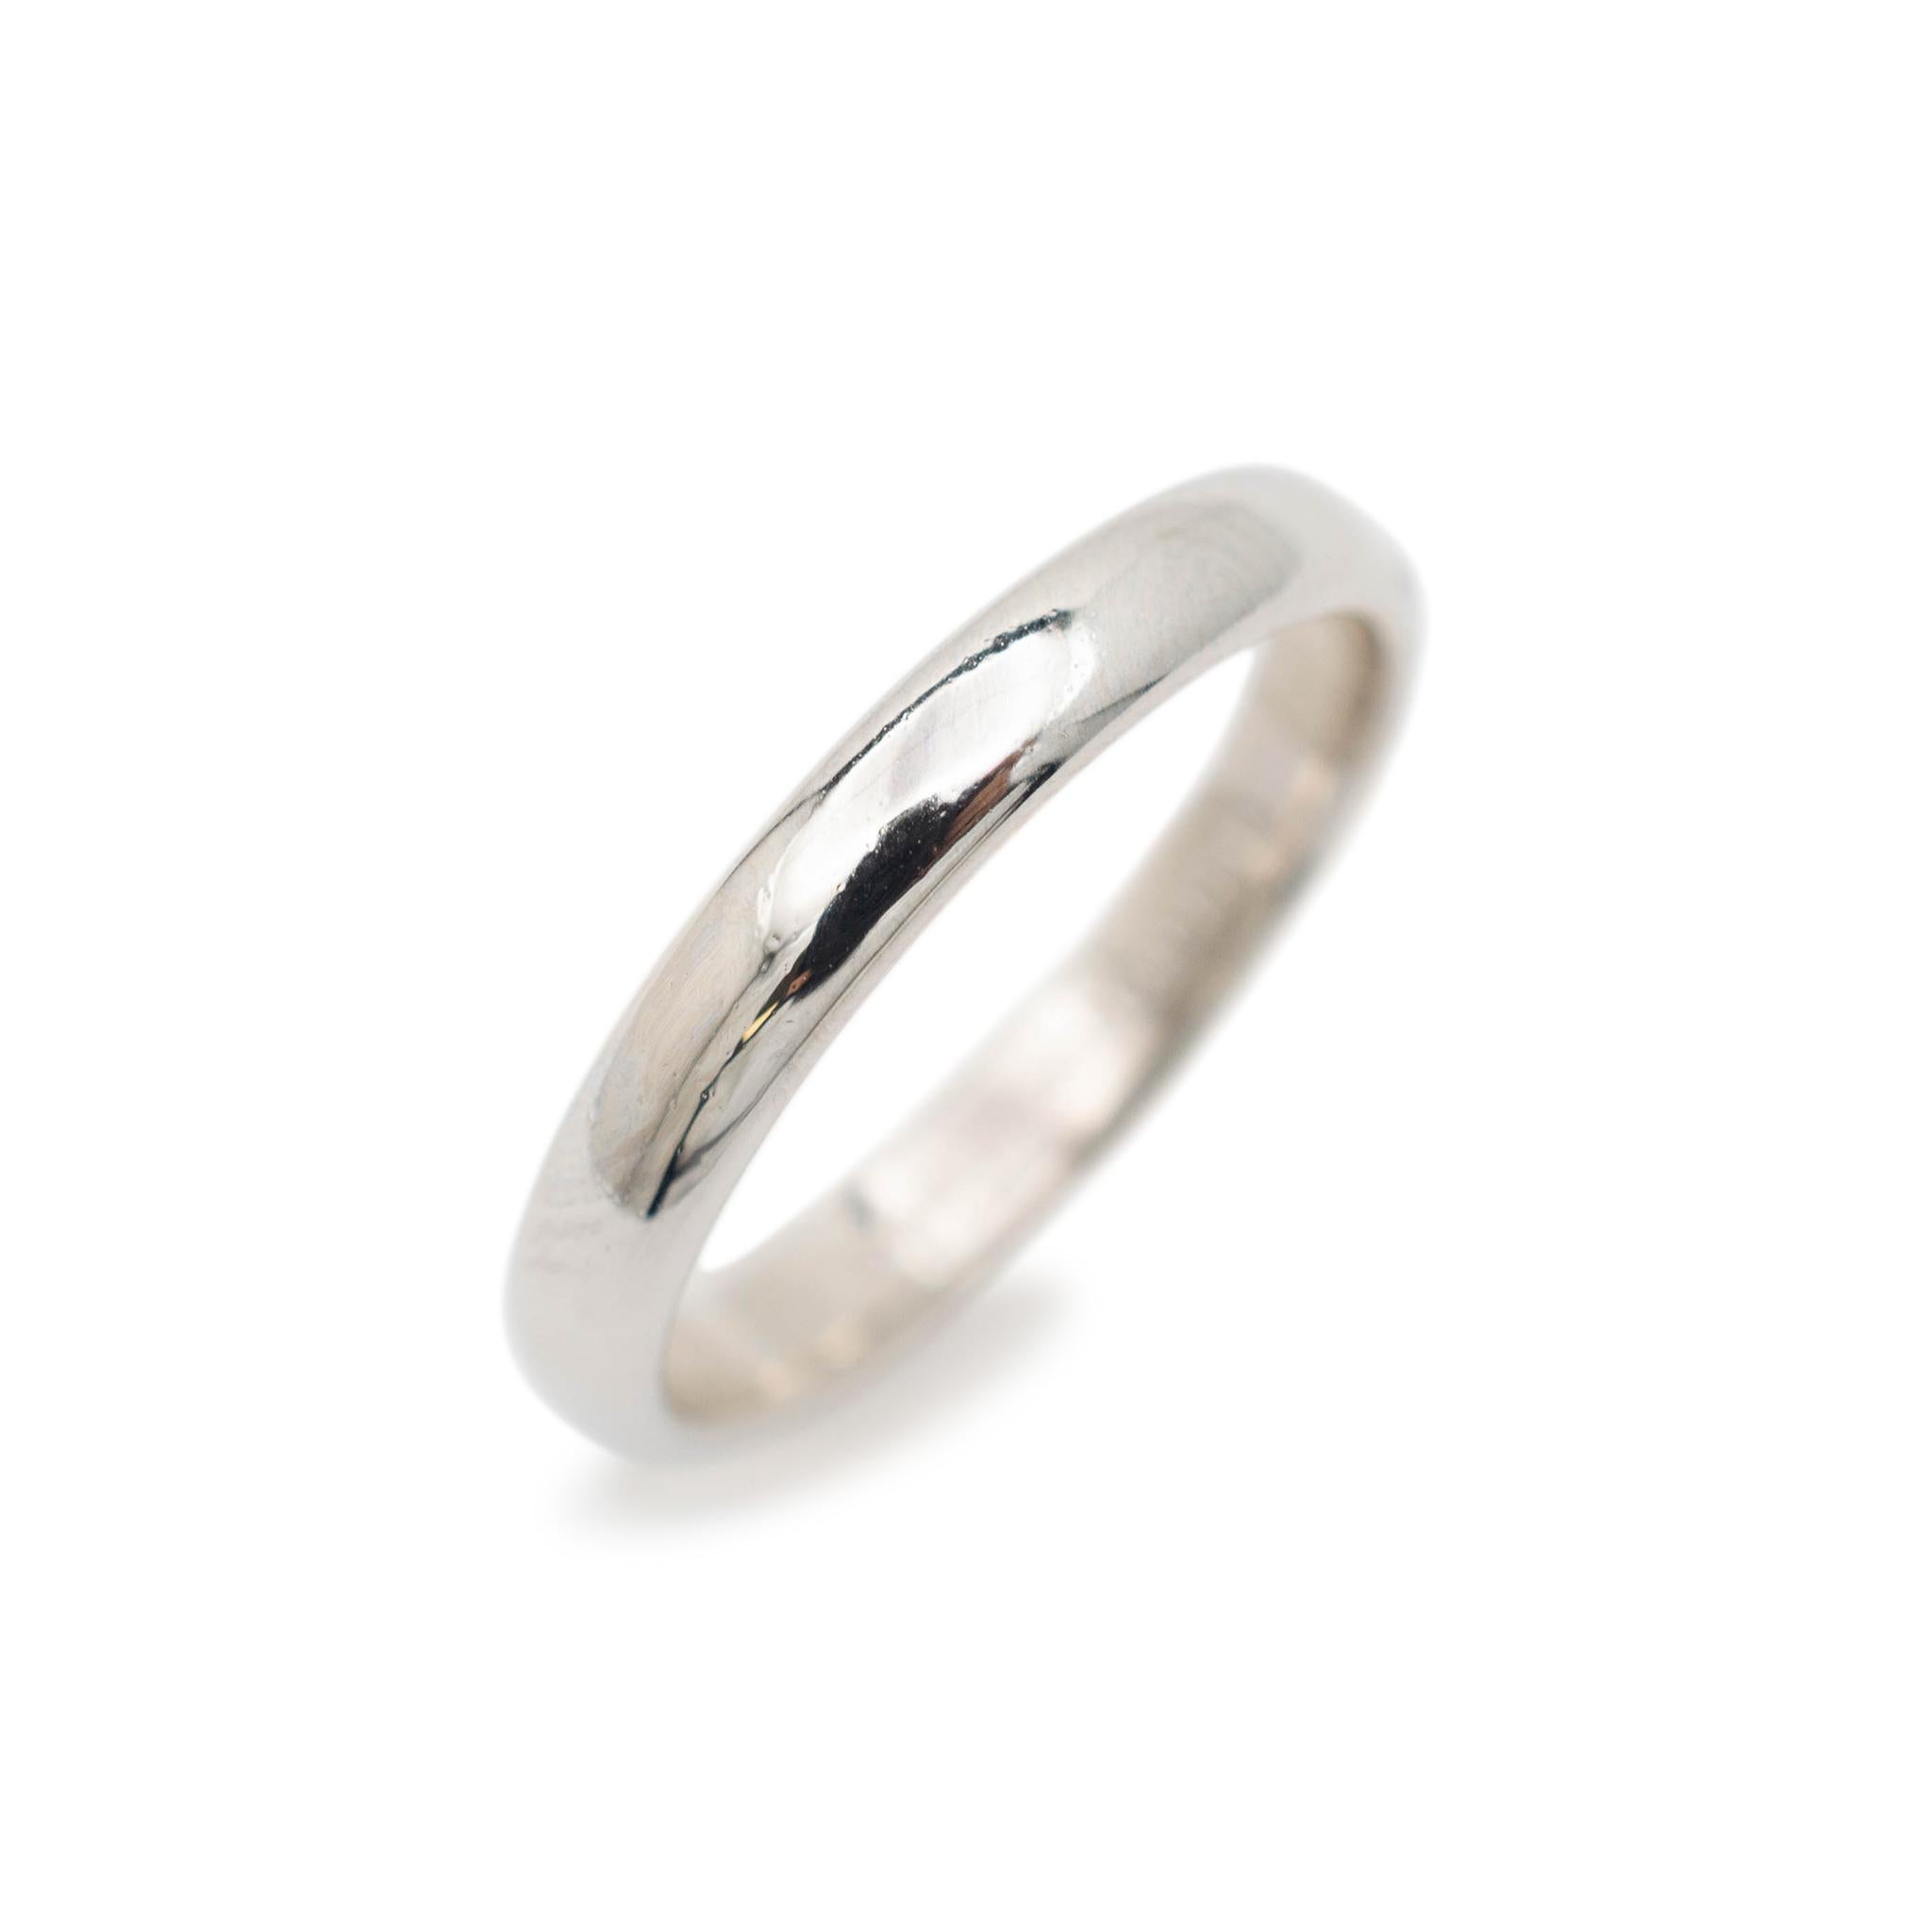 Gender: Ladies

Material: 950 Platinum

Size: 6.5

Shank Width: 3.00mm

Weight: 4.65 grams

Ladies 950 platinum wedding band with a half-round shank.

Engraved with 